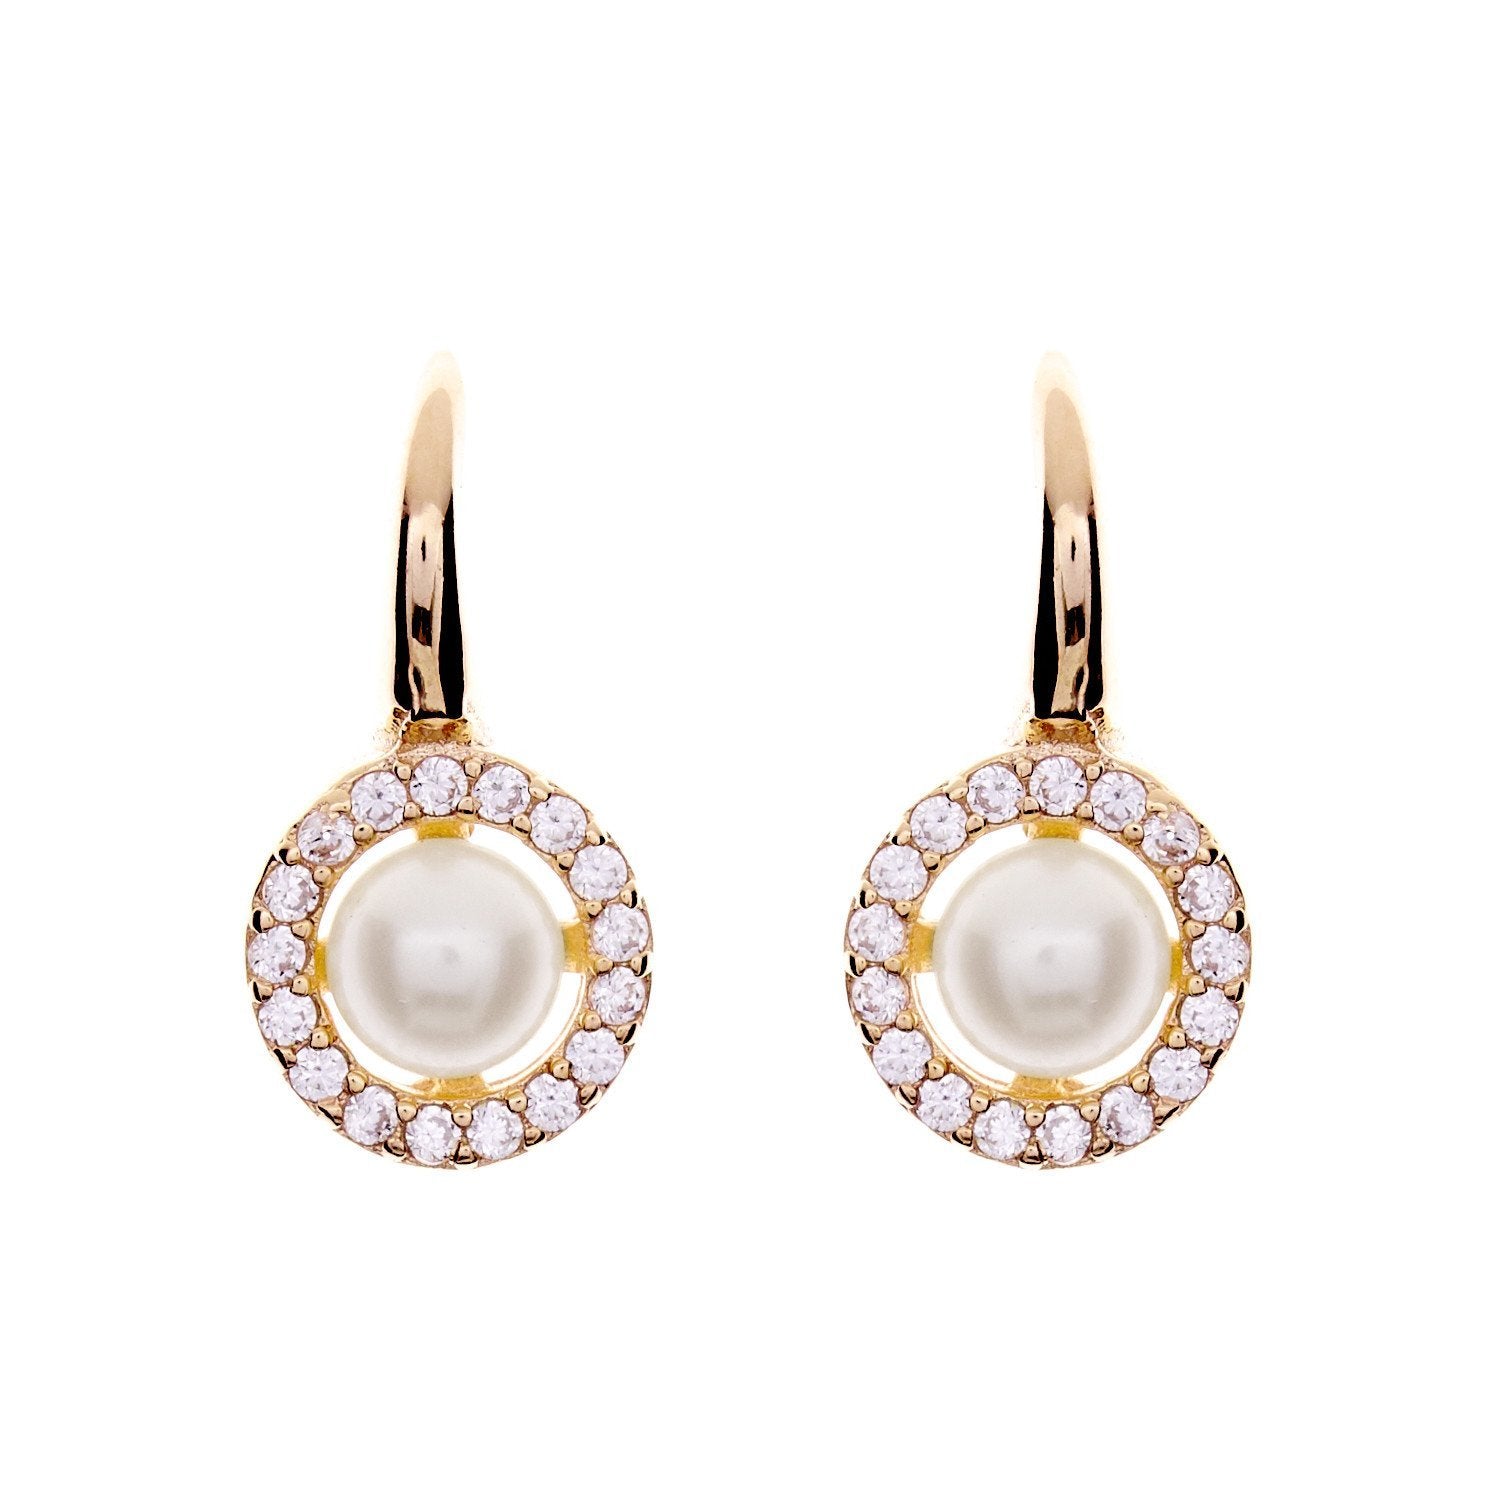 Sybella Earrings Sybella yellow gold round freshwater pearl stud